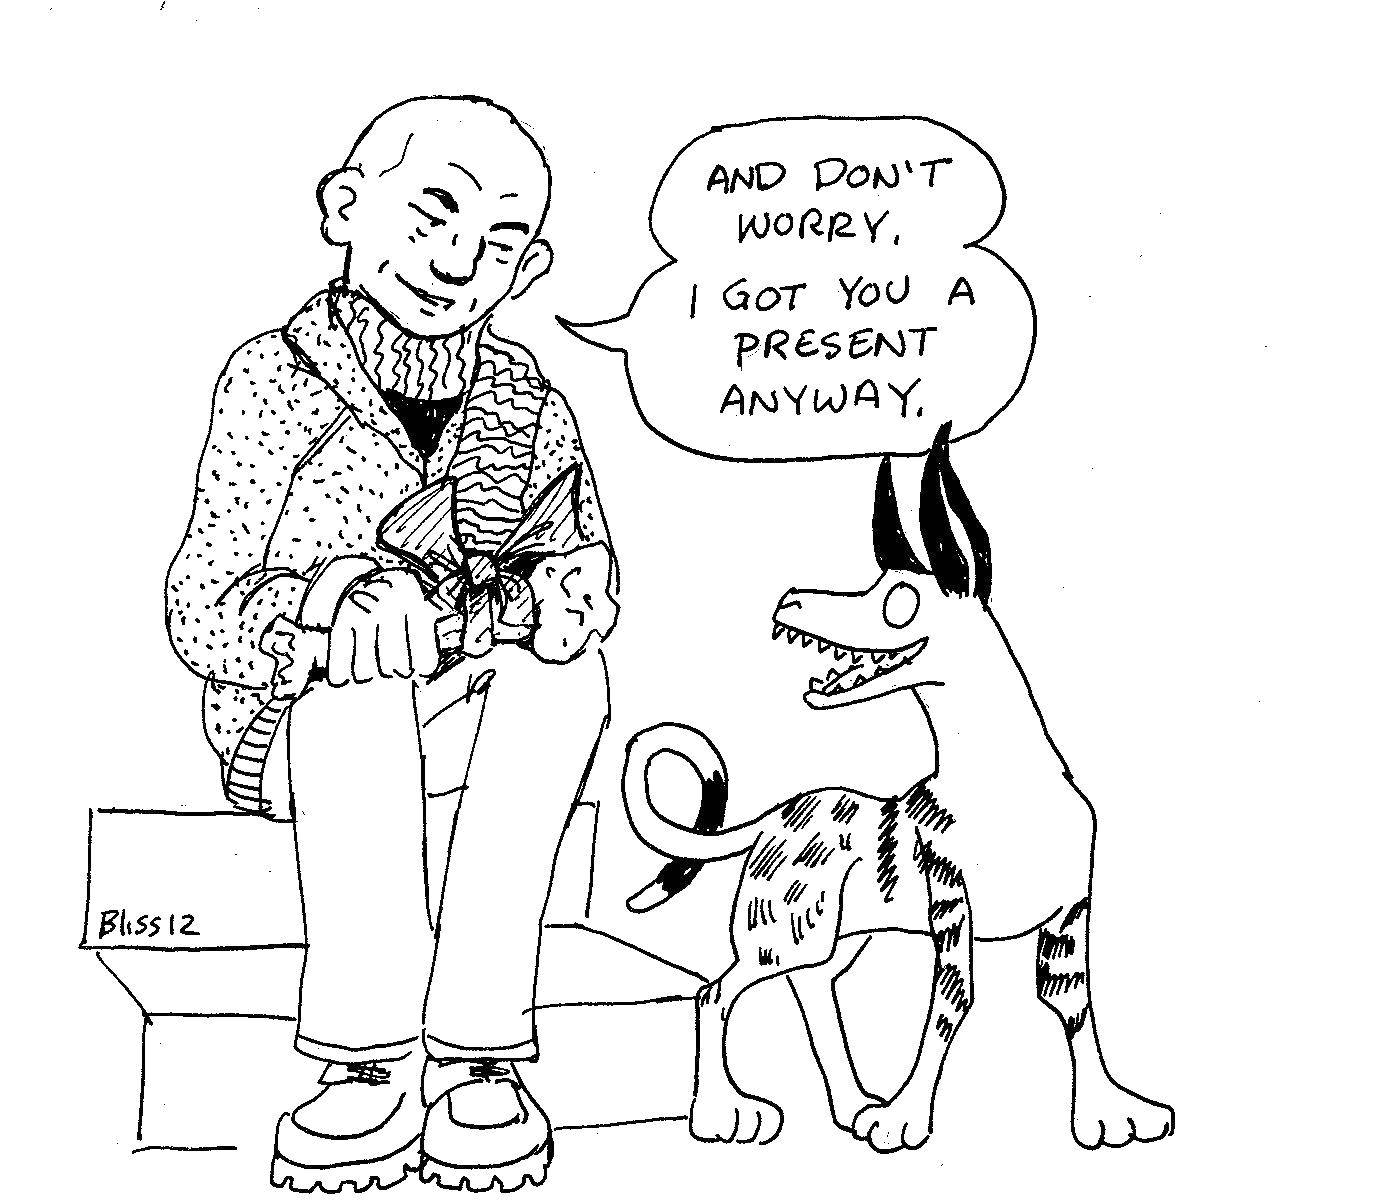 Coloring Host with dog. Category dogs. Tags:  the dog, the owner.